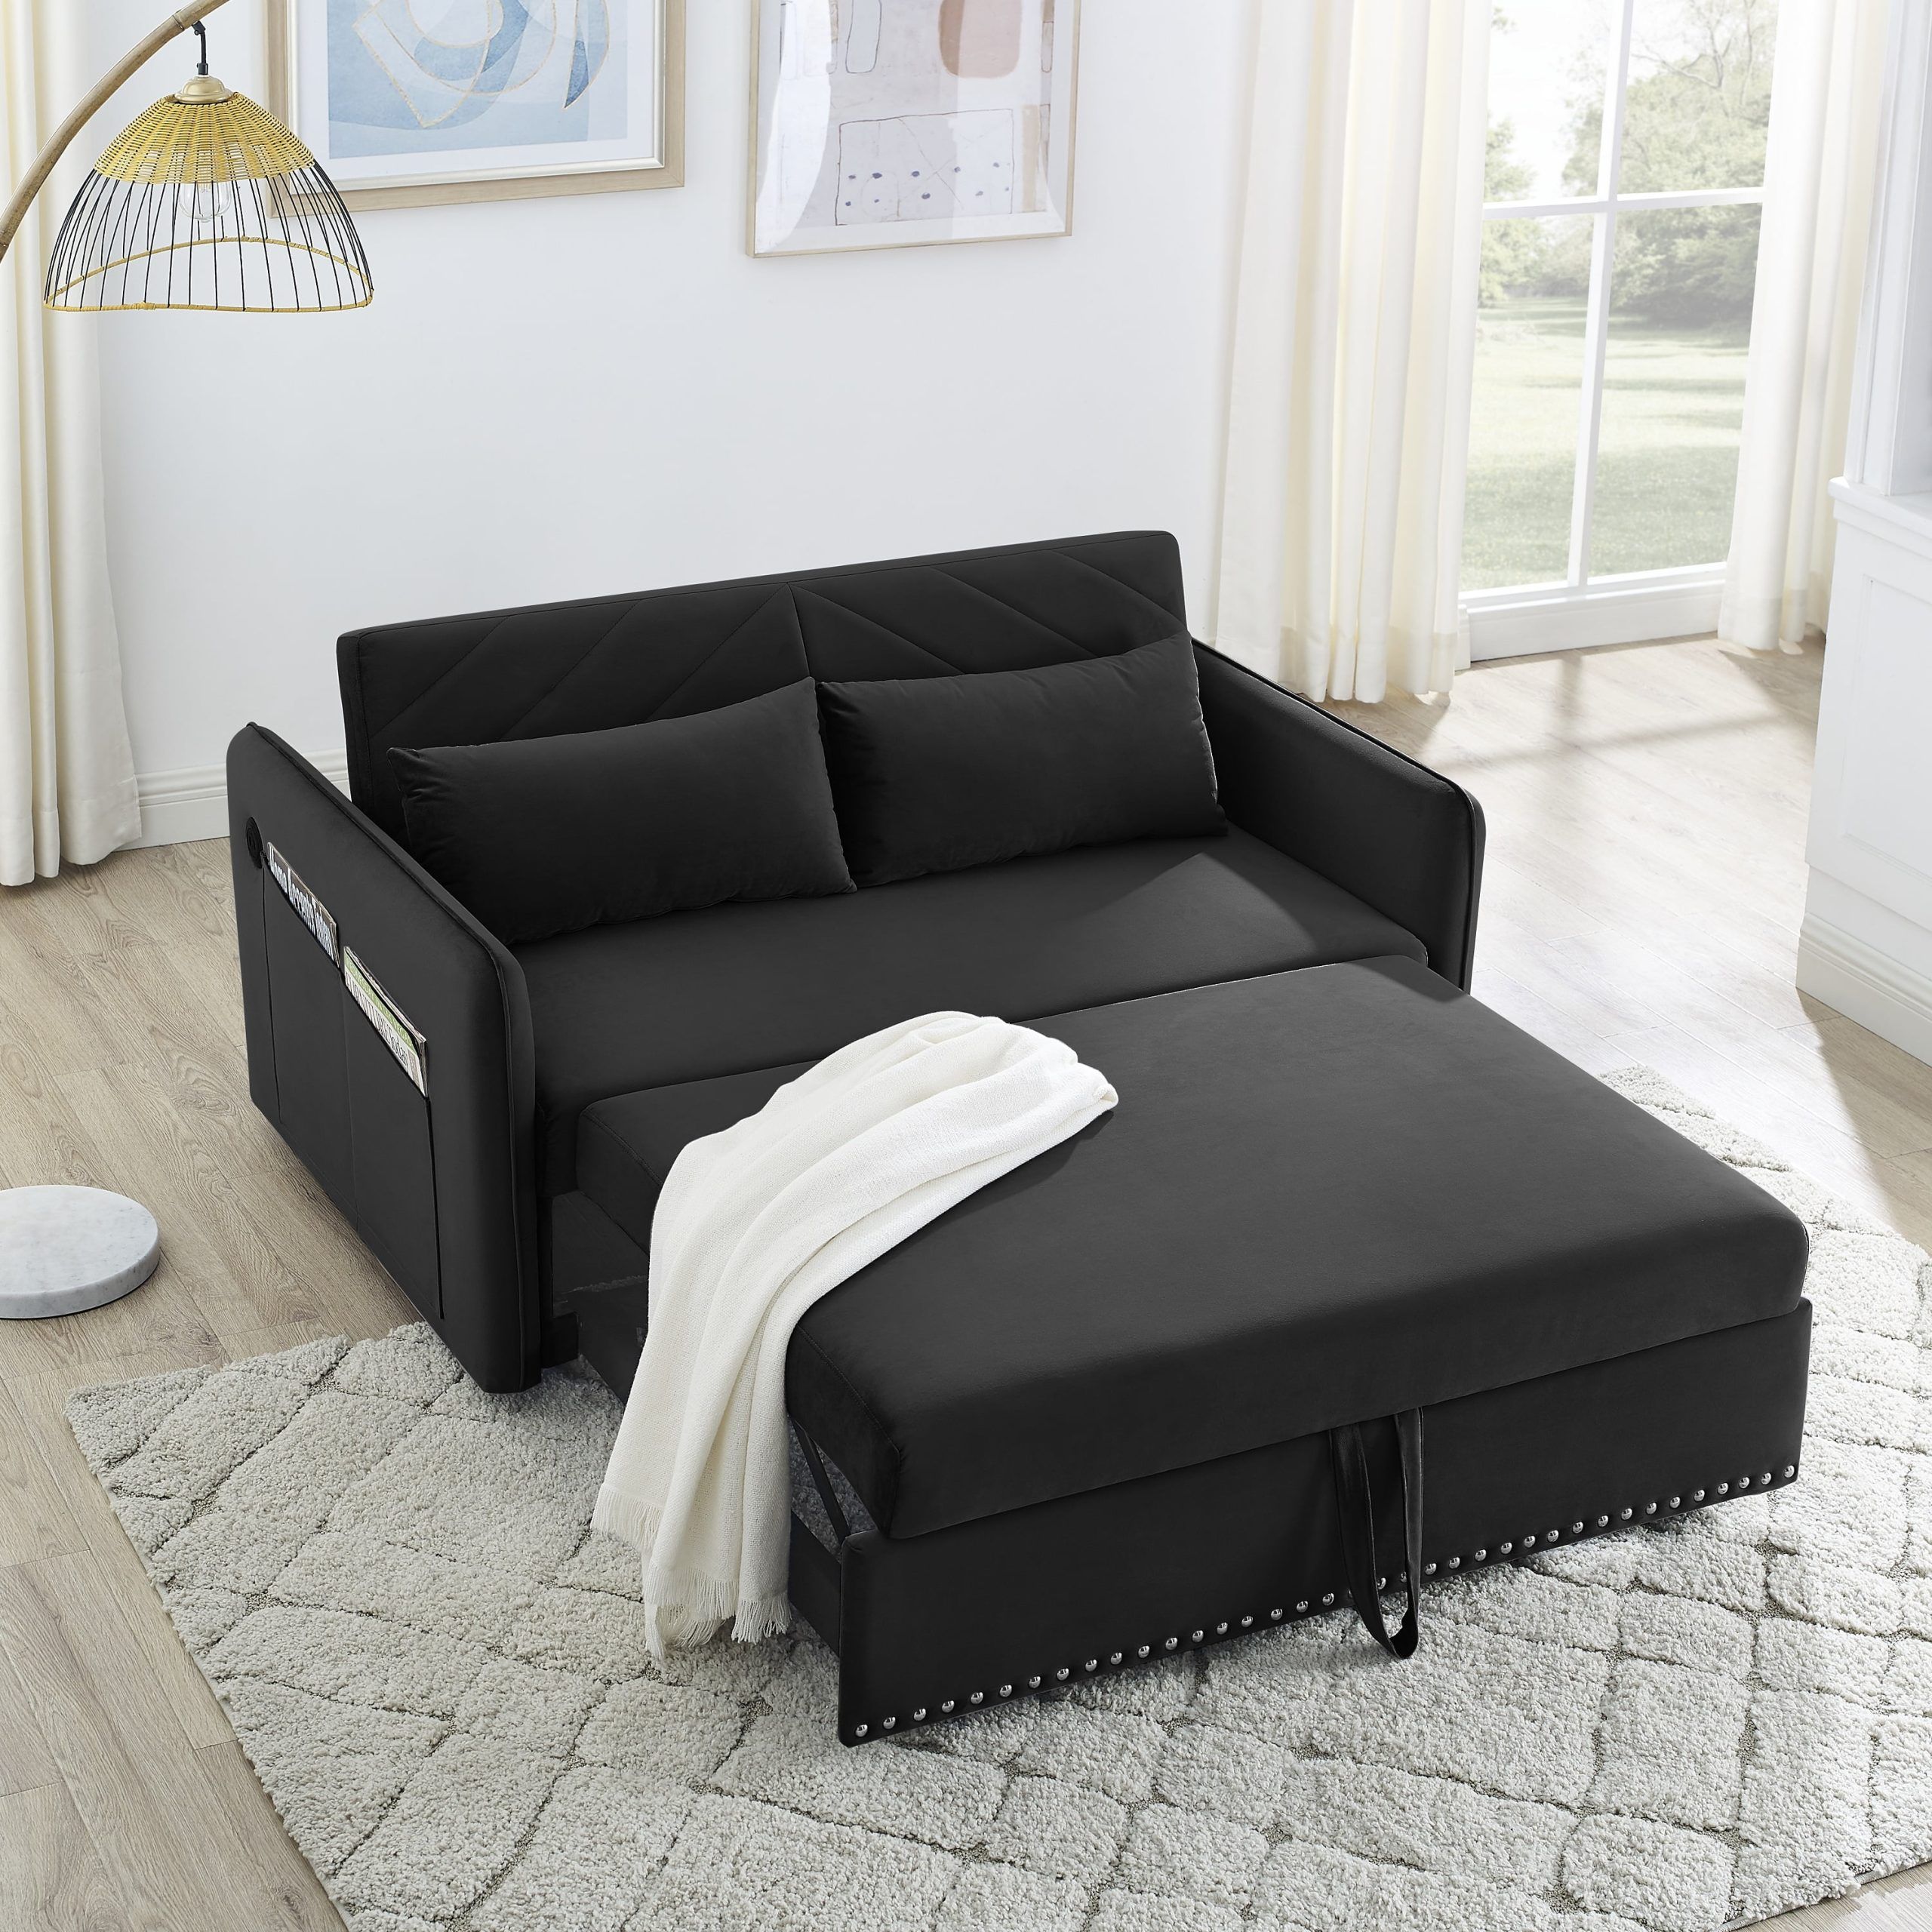 Momspeace 3 In 1 Sleeper Sofa Couch Bed With 2 Usb Ports, 55" Velvet  Convertible Loveseat With Pull Out Sofa Bed For Living Room – Black –  Walmart Regarding 3 In 1 Gray Pull Out Sleeper Sofas (Photo 5 of 15)